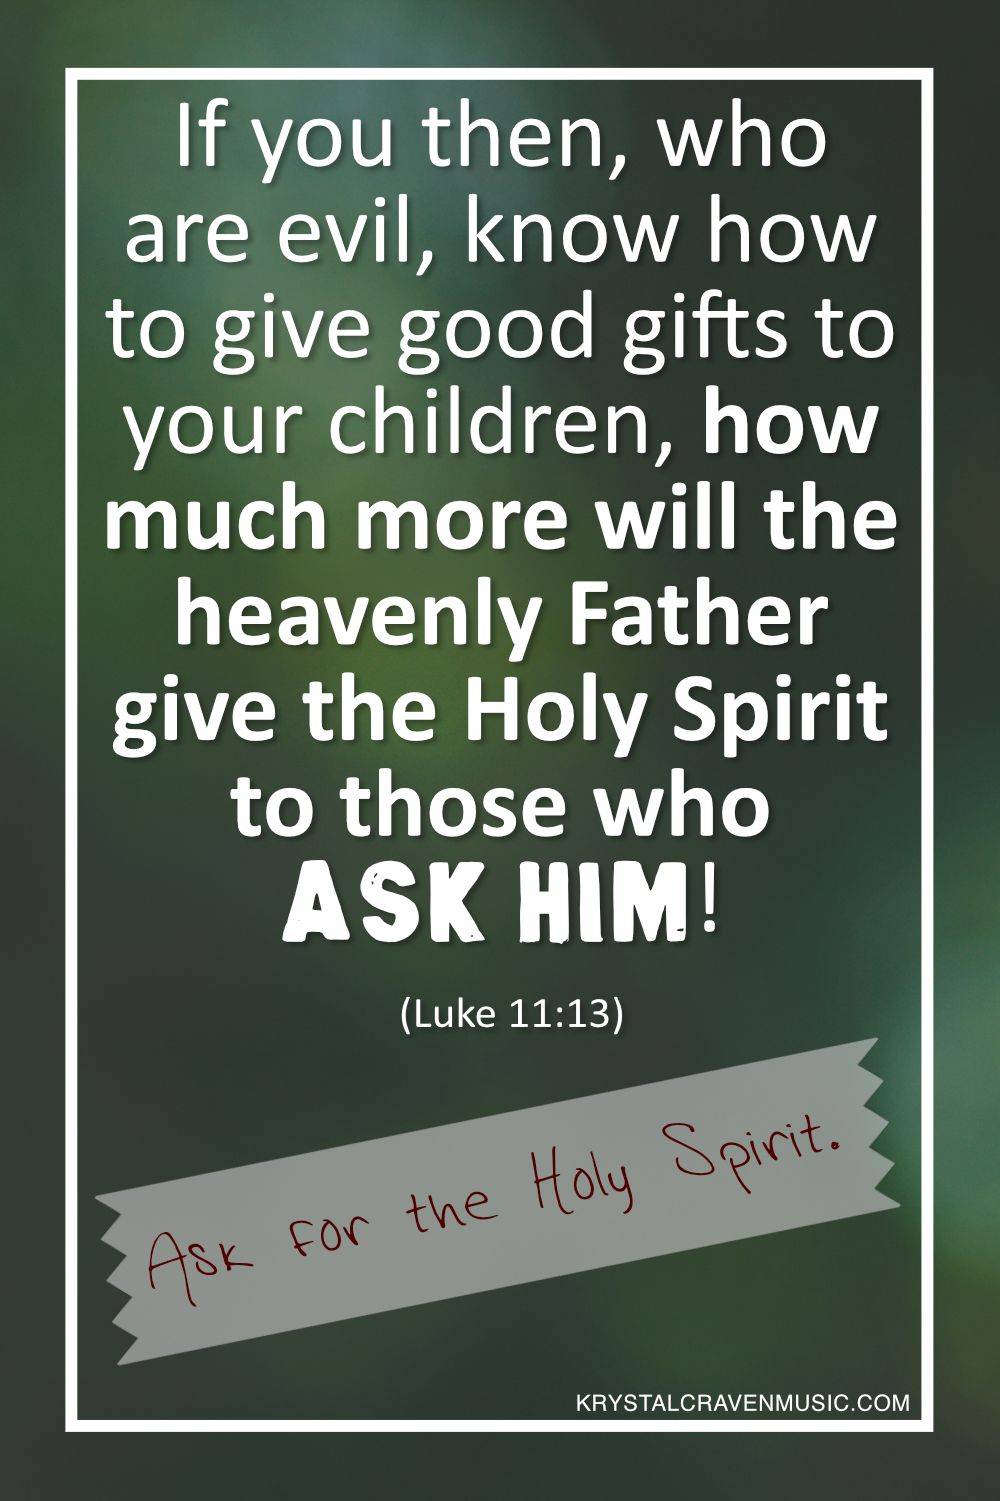 The text from Luke 11:13 "If you then, who are evil, know how to give good gifts to your children, how much more will the heavenly Father give the Holy Spirit to those who ask him!" overlaying a green out of focus image with a piece of paper below the text with the words "Ask for the Holy Spirit".